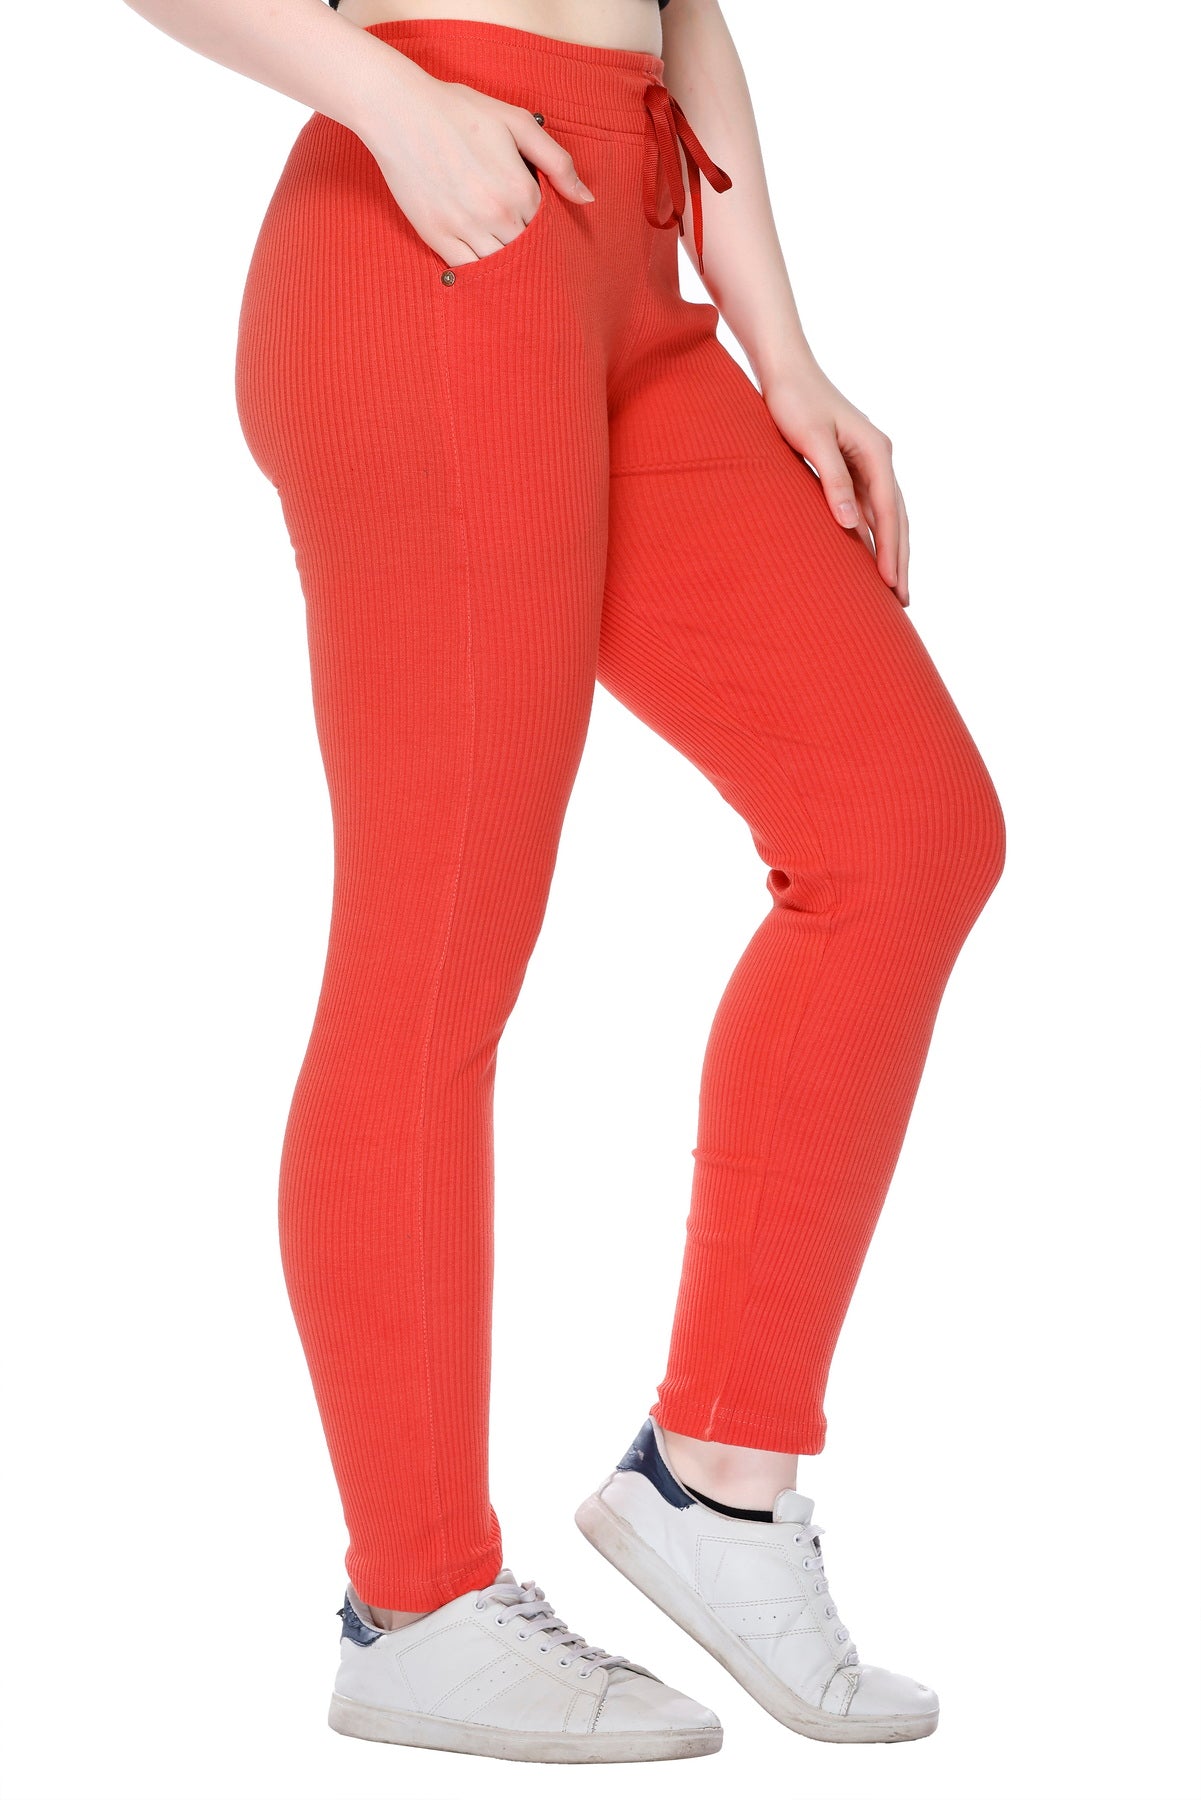 Nexstep Solid, Printed Women Black, Blue Tights - Buy Nexstep Solid,  Printed Women Black, Blue Tights Online at Best Prices in India |  Flipkart.com